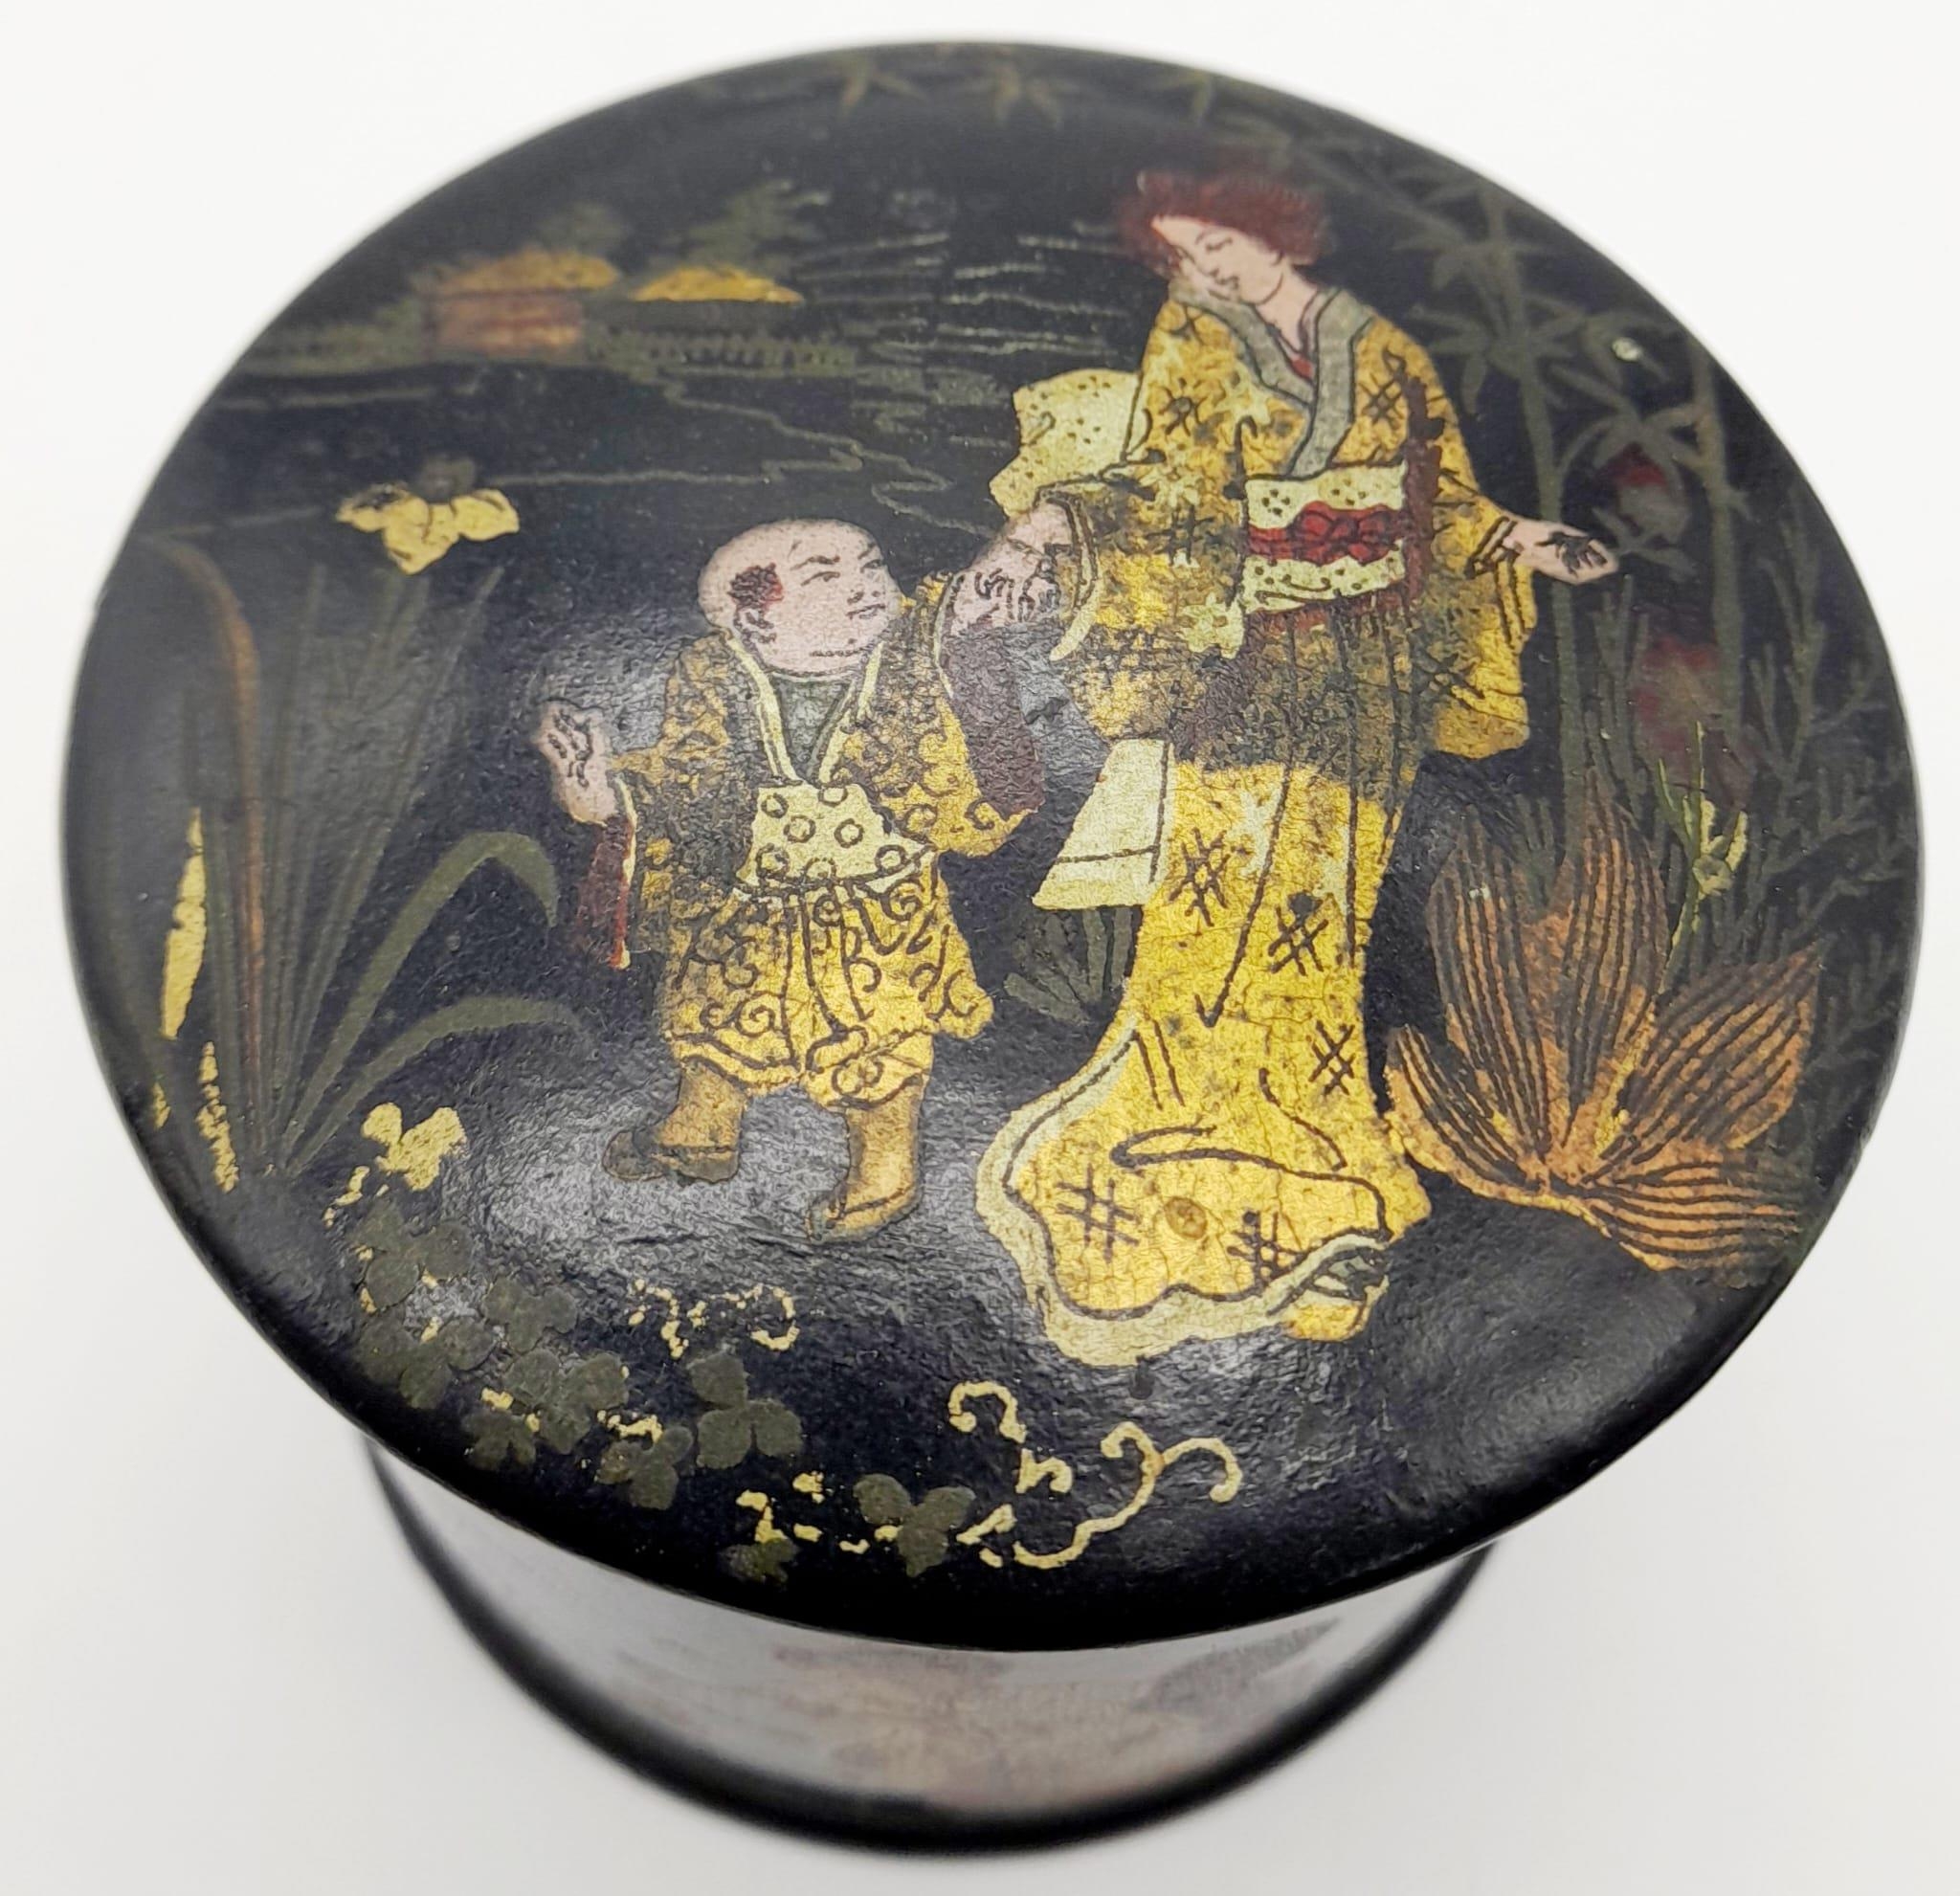 An Antique Chinese Black Lacquer Box. Wonderful decoration with gold on black depicting Mothers at - Image 2 of 7